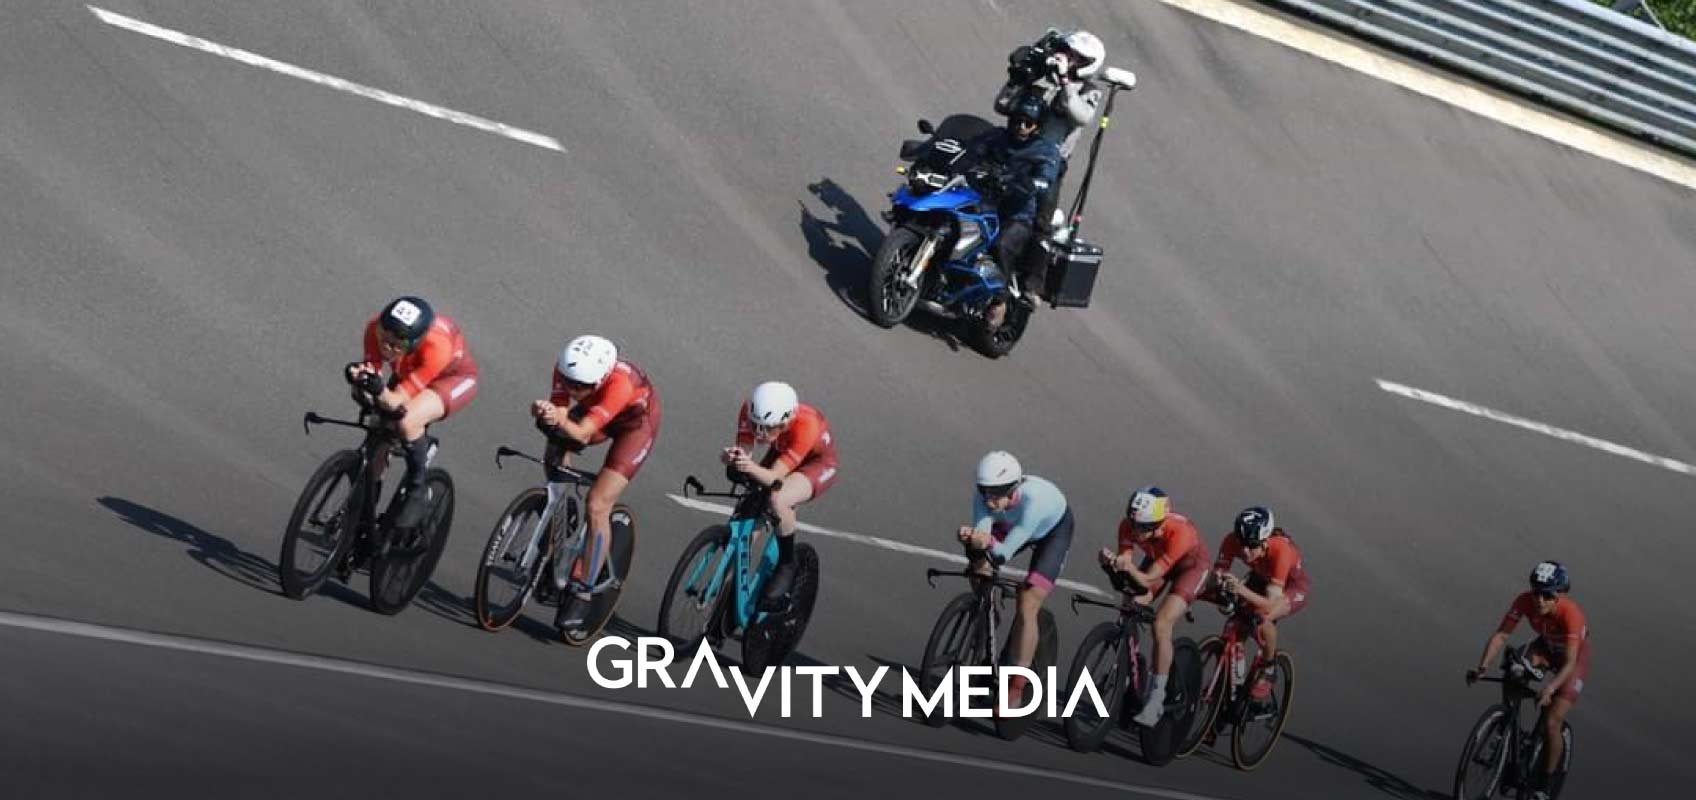 Haivision Technology Powered Gravity Media’s Remote Production